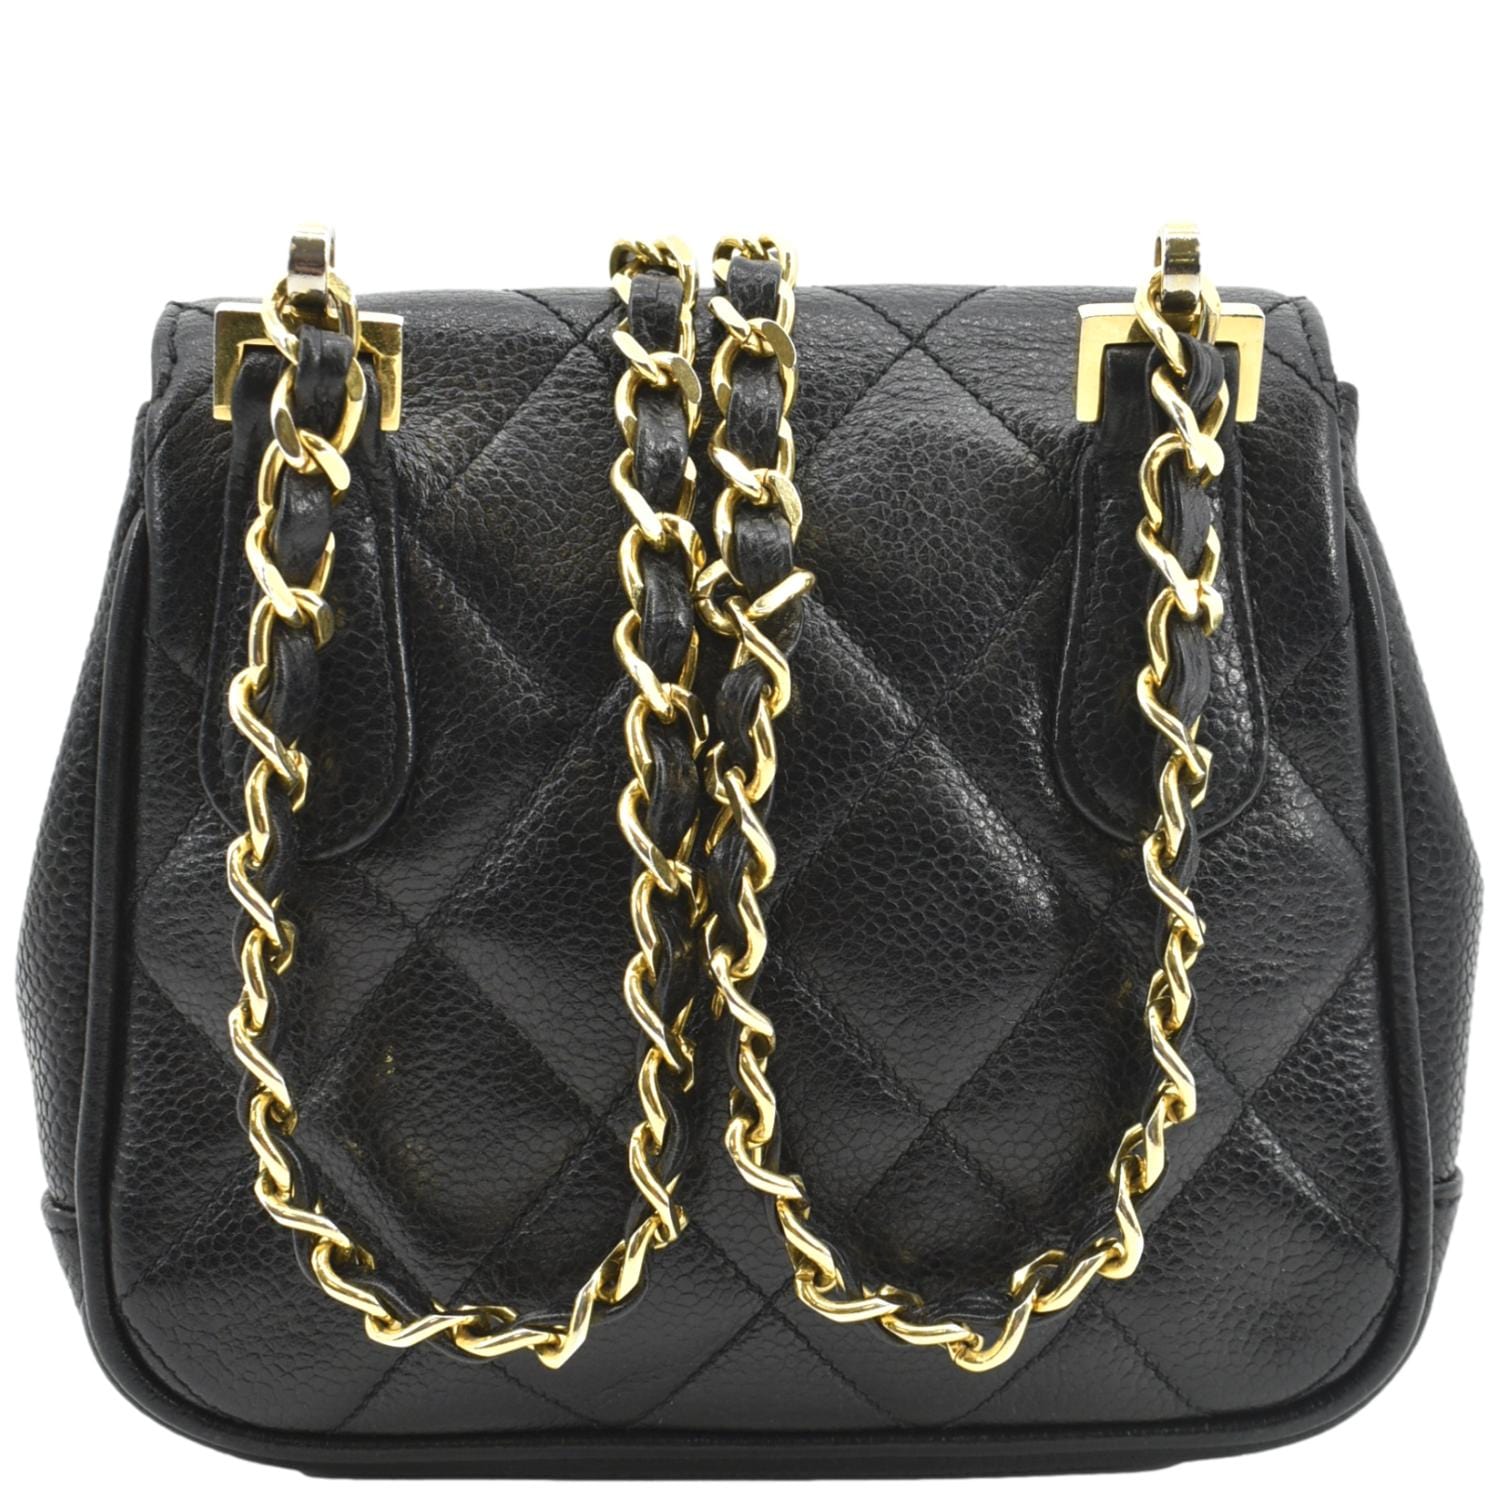 CHANEL Round Flap Vintage Quilted Caviar Leather Crossbody Bag Black